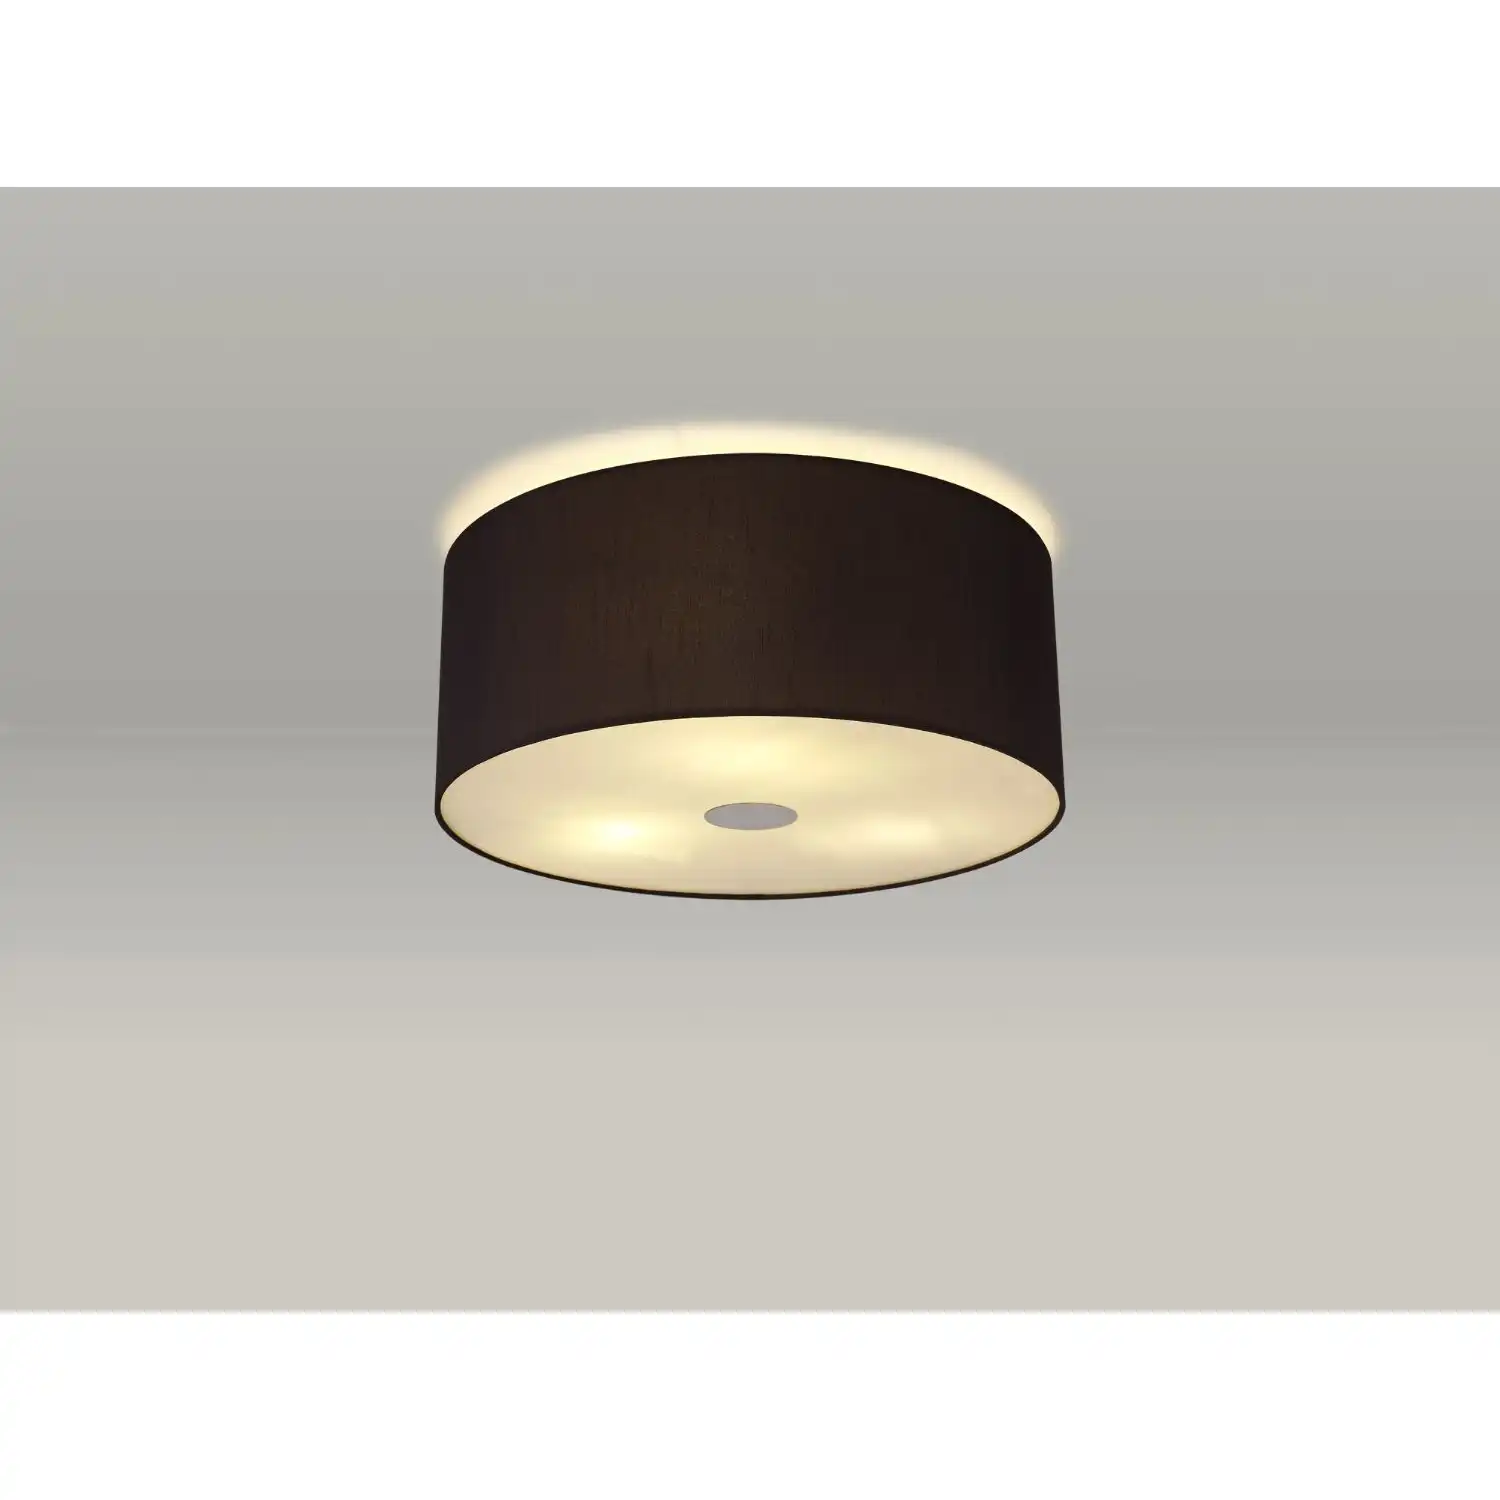 Baymont Polished Chrome 3 Light E27 Drop Flush Ceiling c w 400 Faux Silk Fabric Shade, Black White Laminate And 400mm Frosted PC Acrylic Diffuser